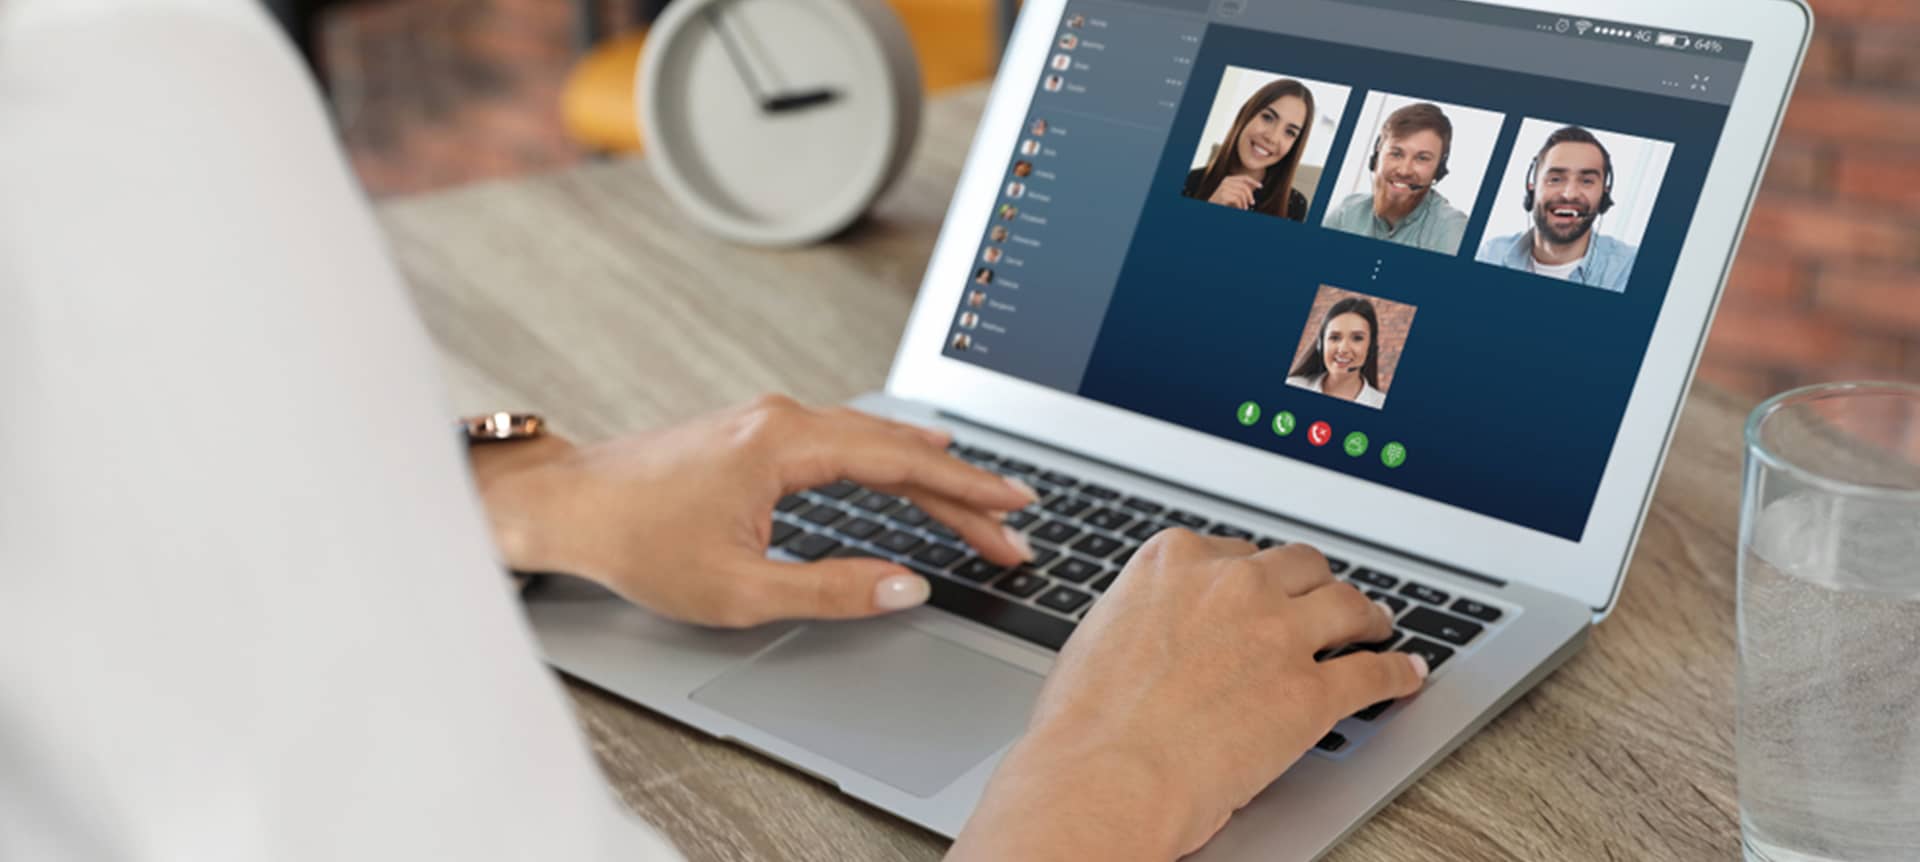 6 Awesome Video Interviewing Software to Look Out For in 2023